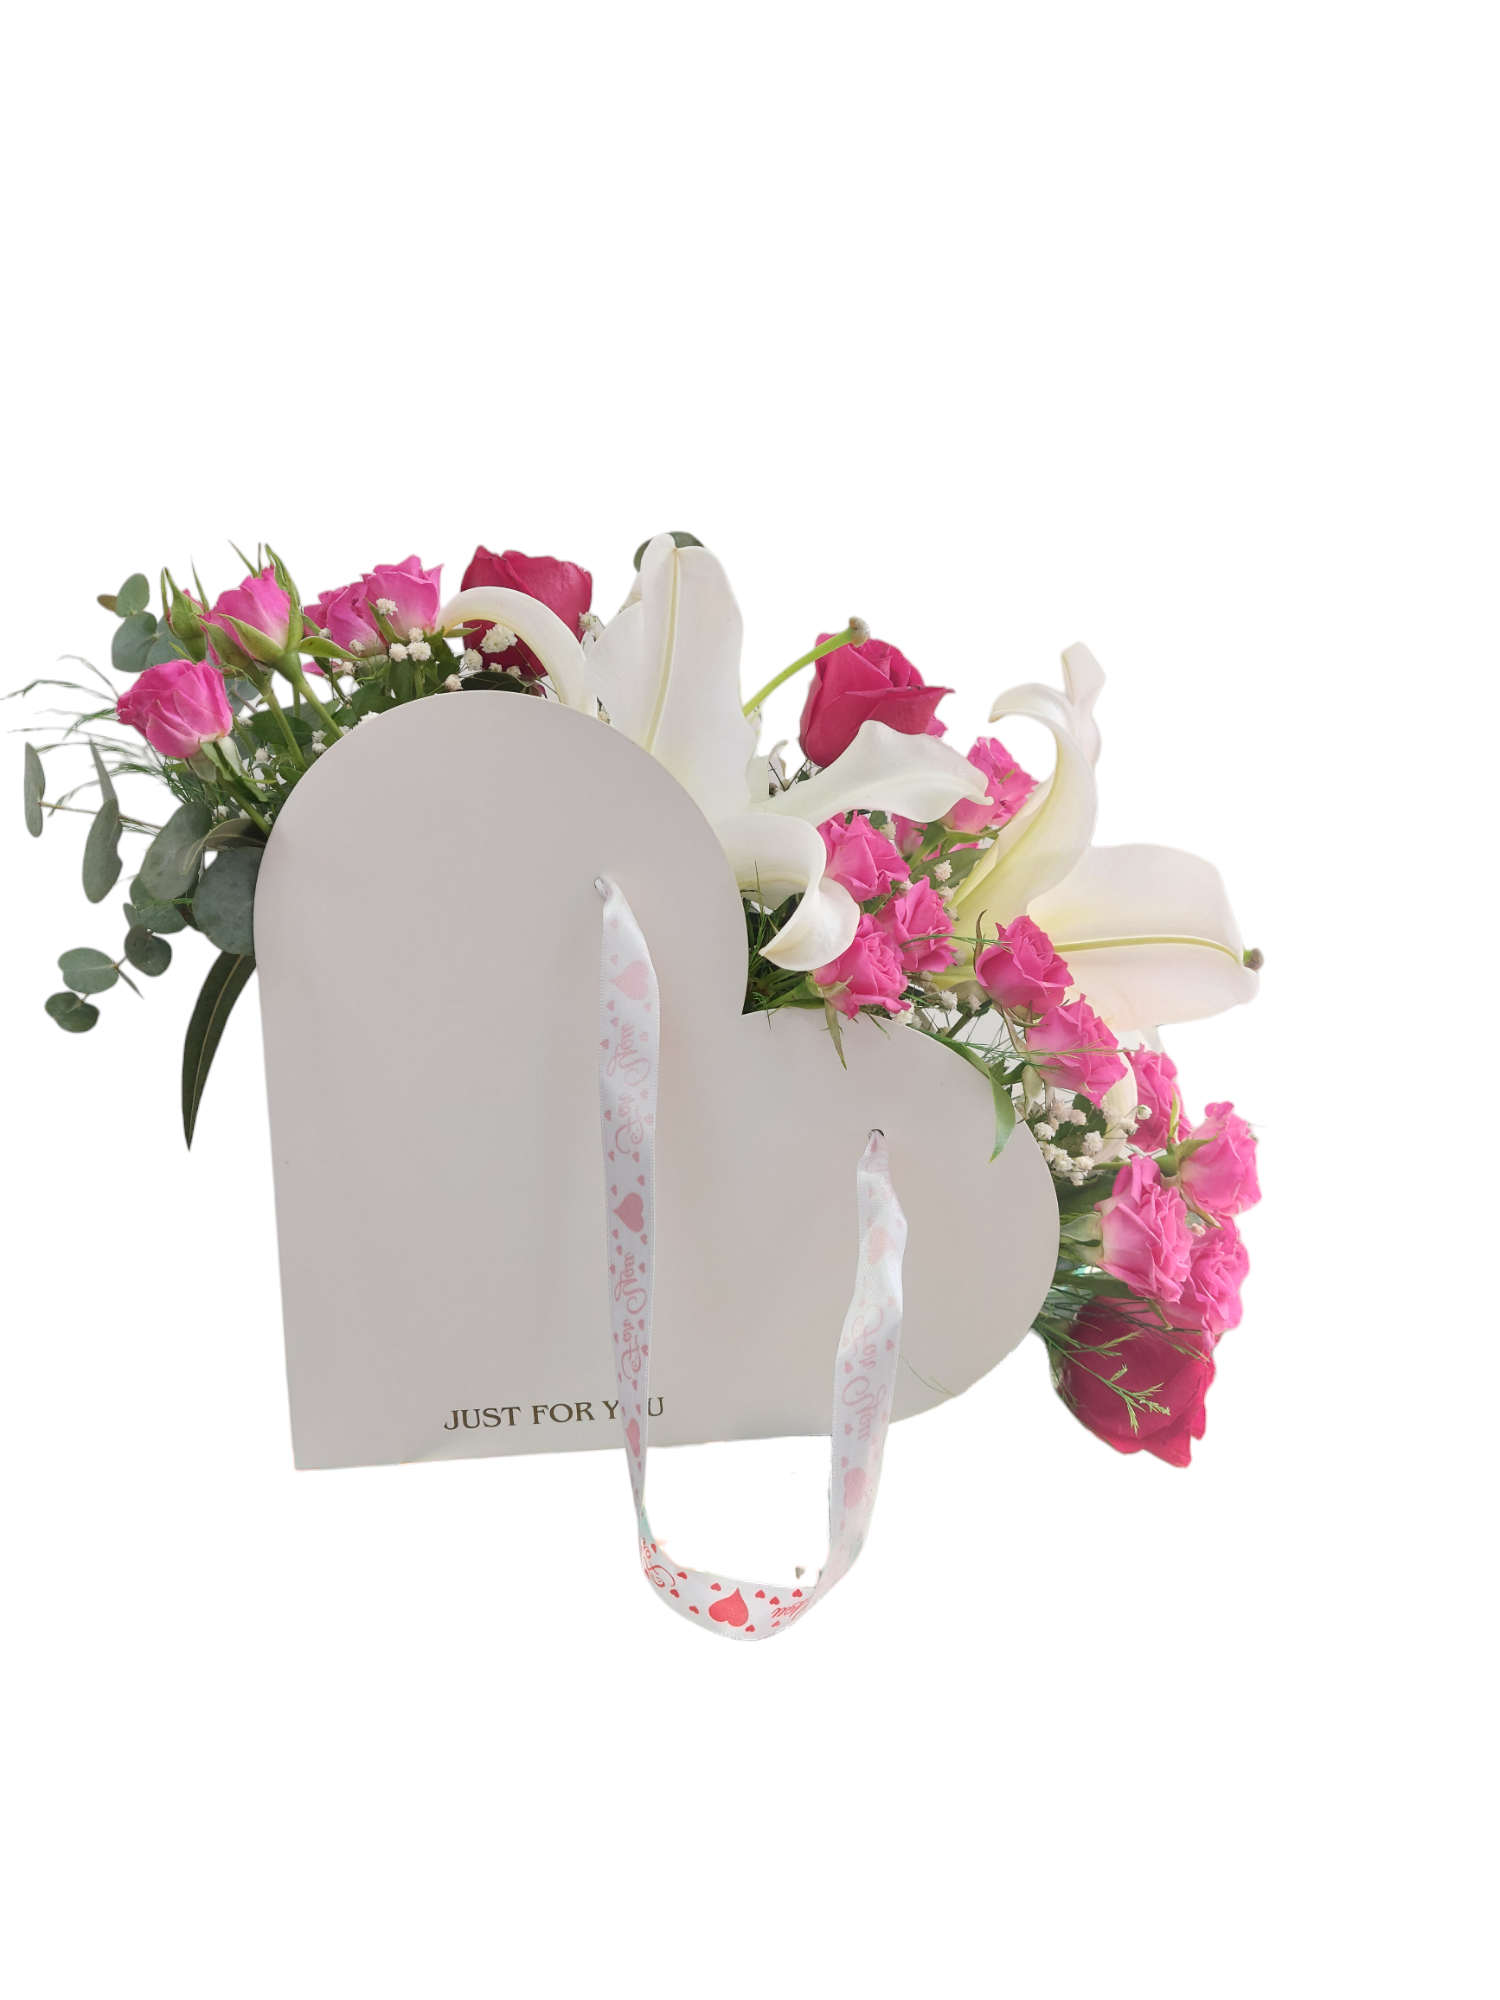 Lilies,%20Red%20Roses,%20Pink%20Arbor%20Roses%20in%20a%20Heart%20Flower%20Bag